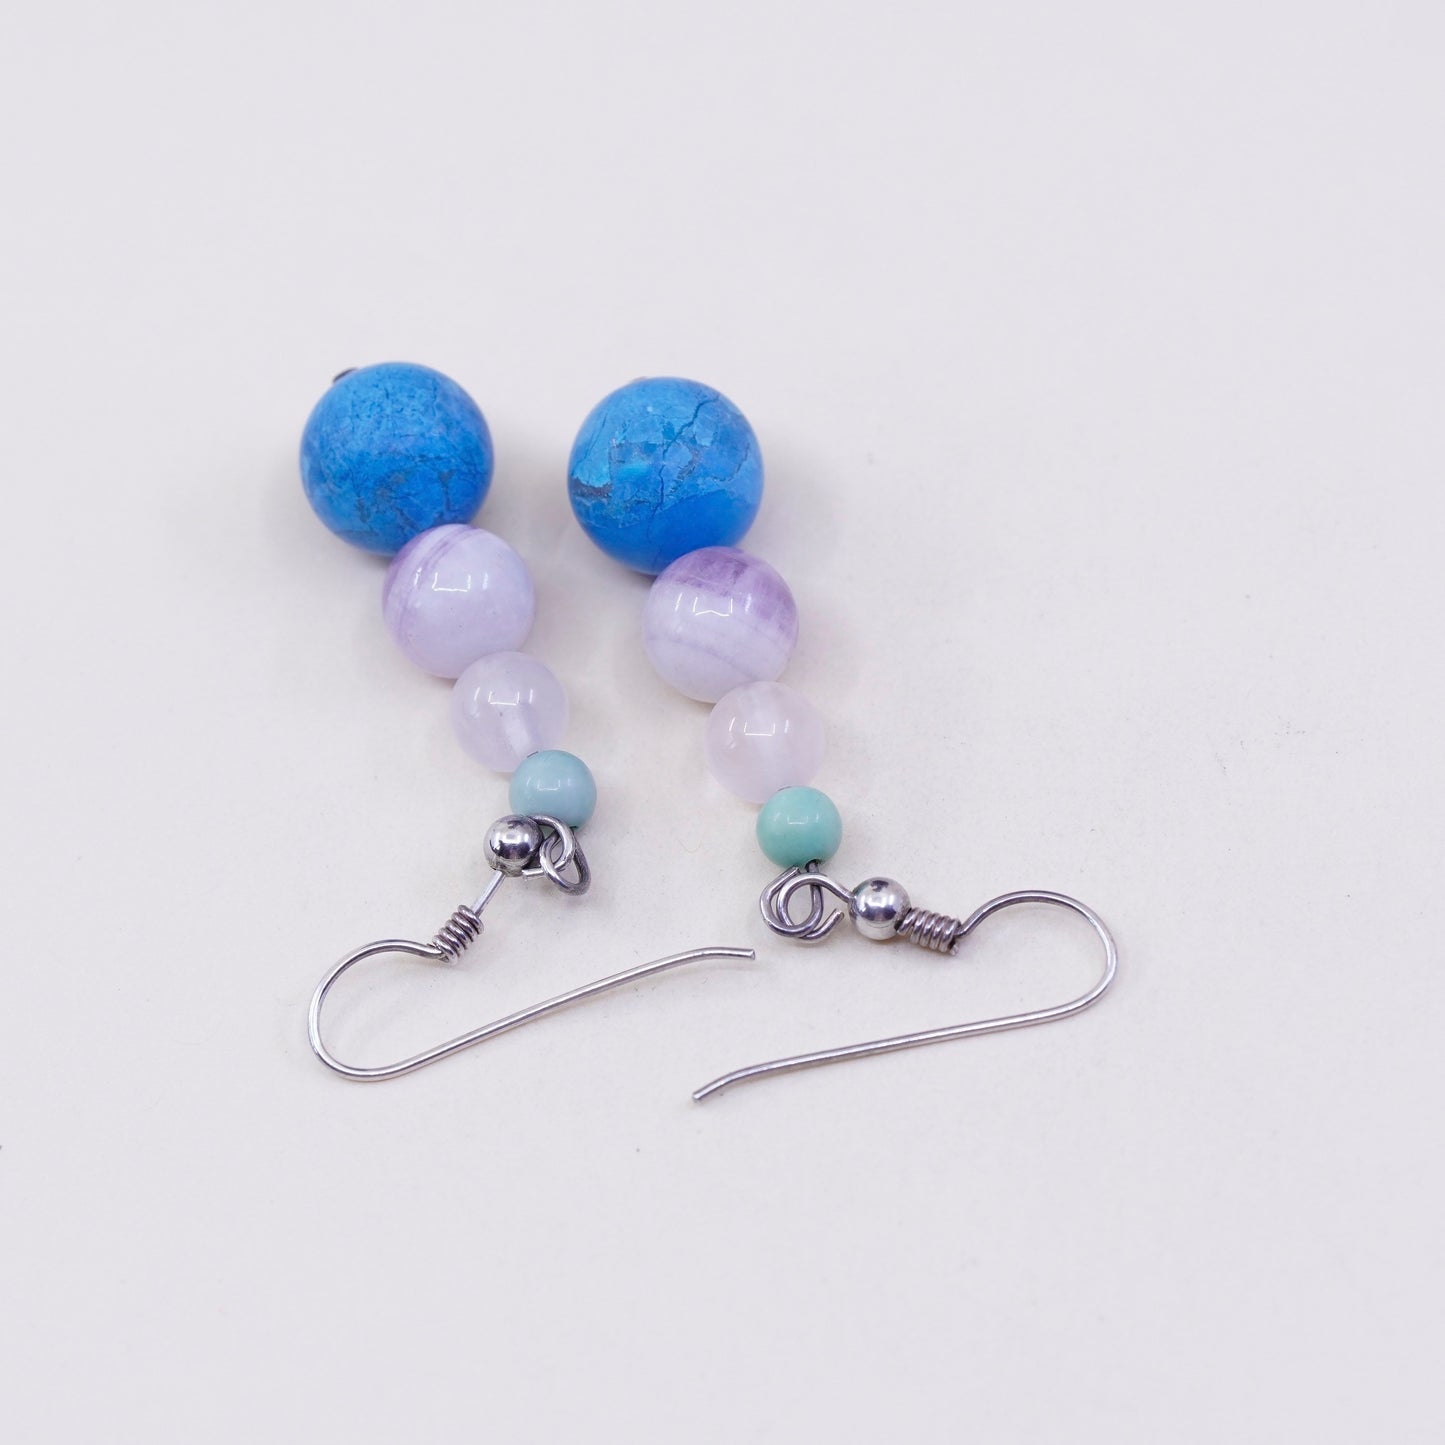 sterling 925 silver handmade earrings w/ turquoise crystal and amethyst beads